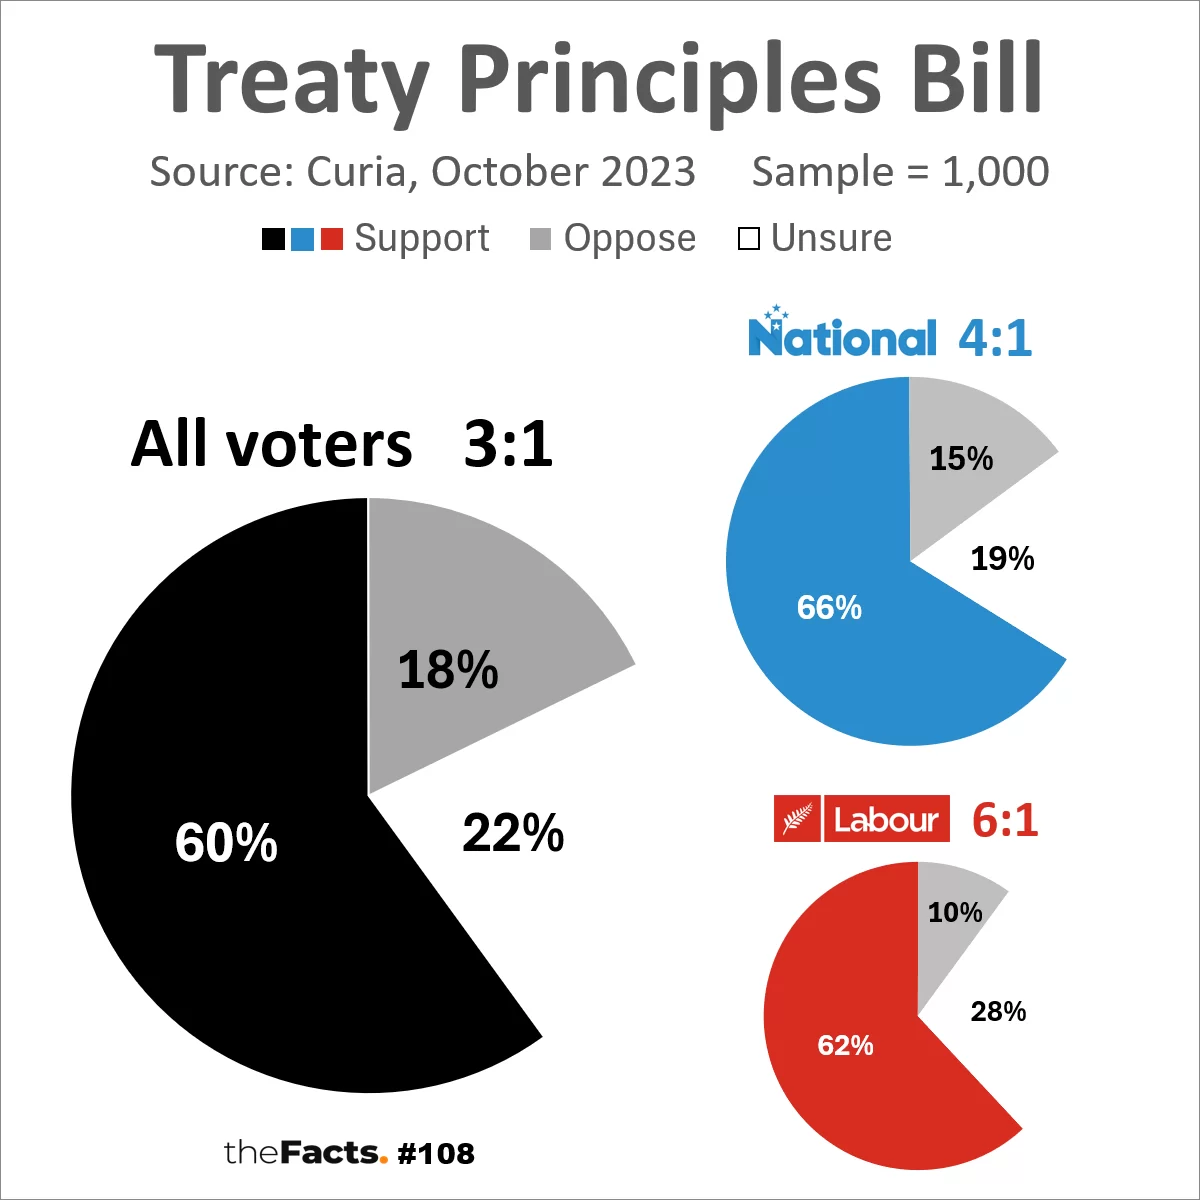 Curia Research - New Zealanders overwhelmingly support Treaty Principles Bill - Centrist